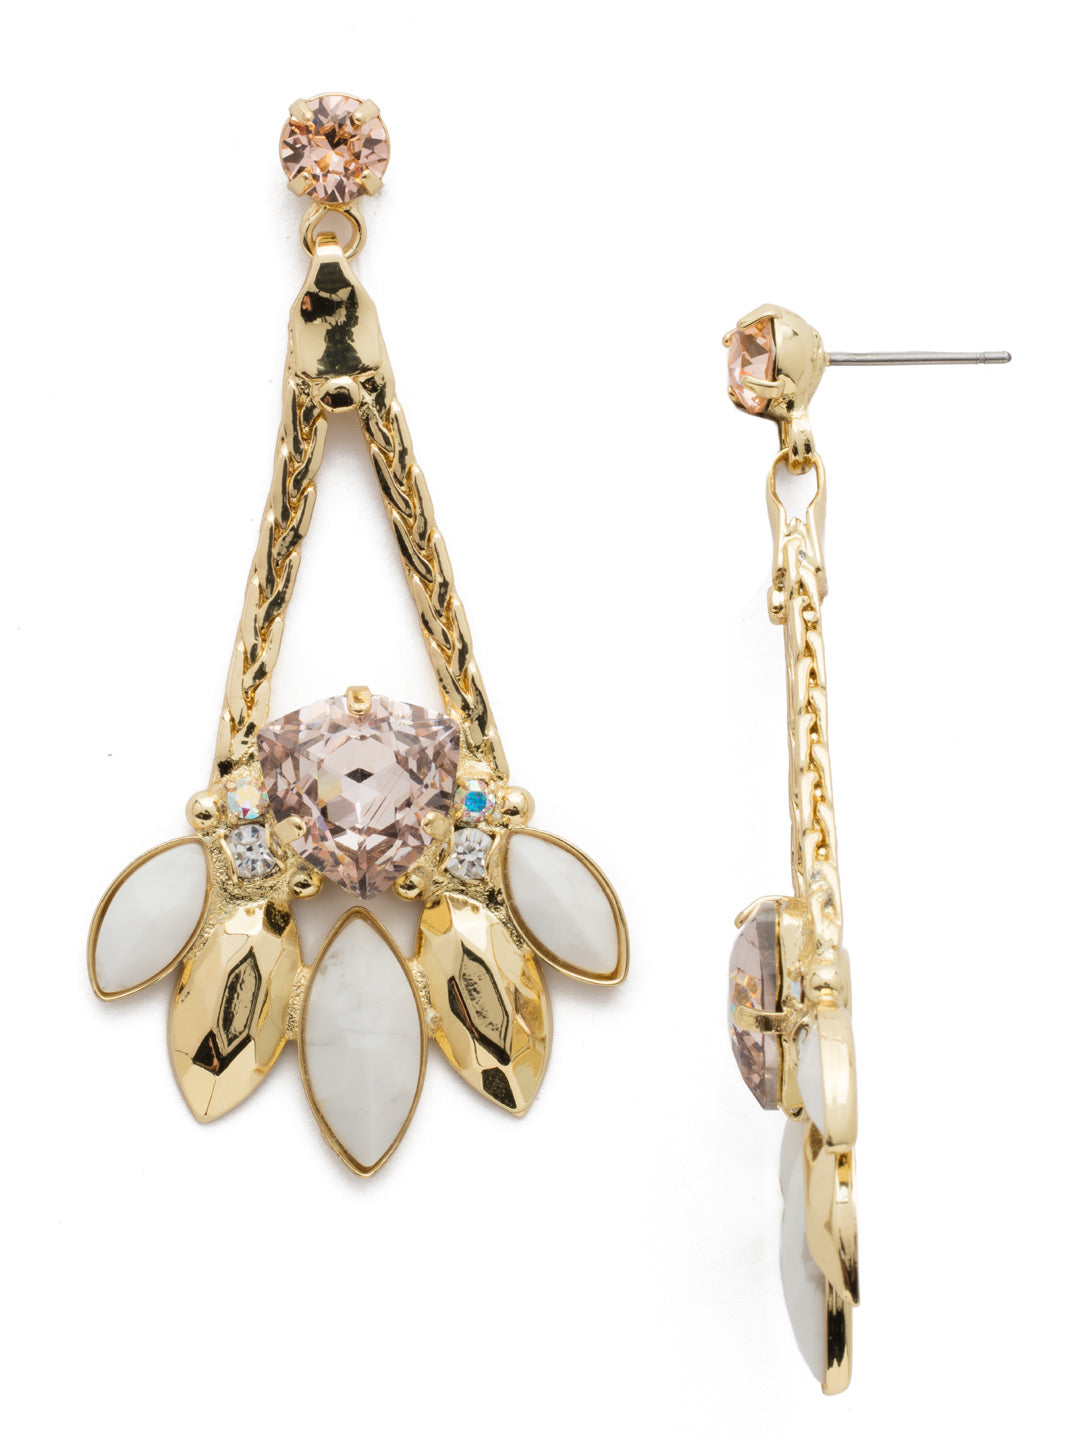 Harmony Dangle Earrings - EDX24BGSCL - The perfect earrings to add that 'wow factor' to any outfit. A small round crystal at the post leads down to a stunning drop design consisting of mixed crystals and navette-shaped stones.